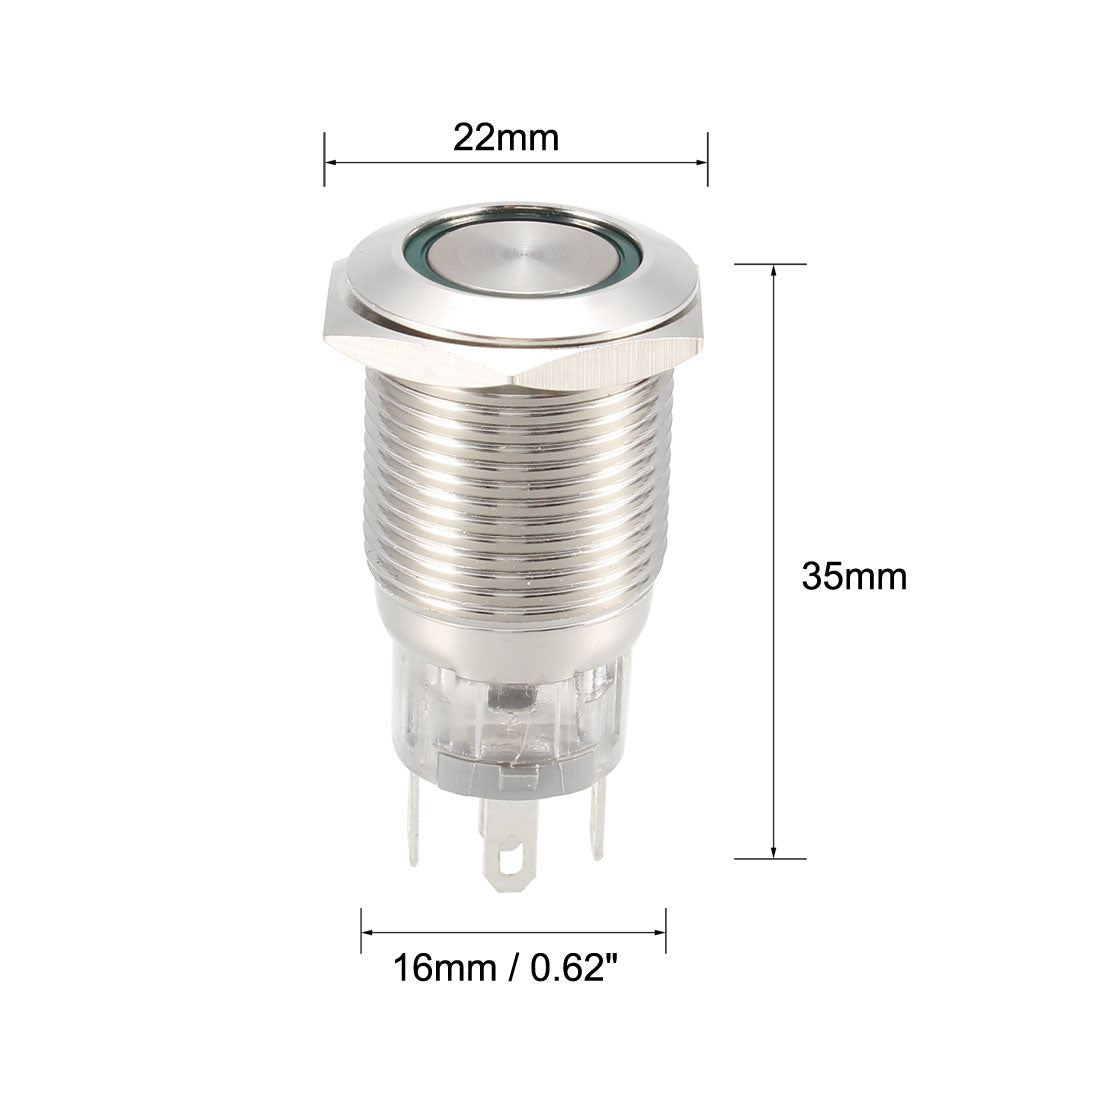 uxcell Uxcell Momentary Push Button Switch 16mm Mounting 1NC NO COM 12V LED with Socket Plug